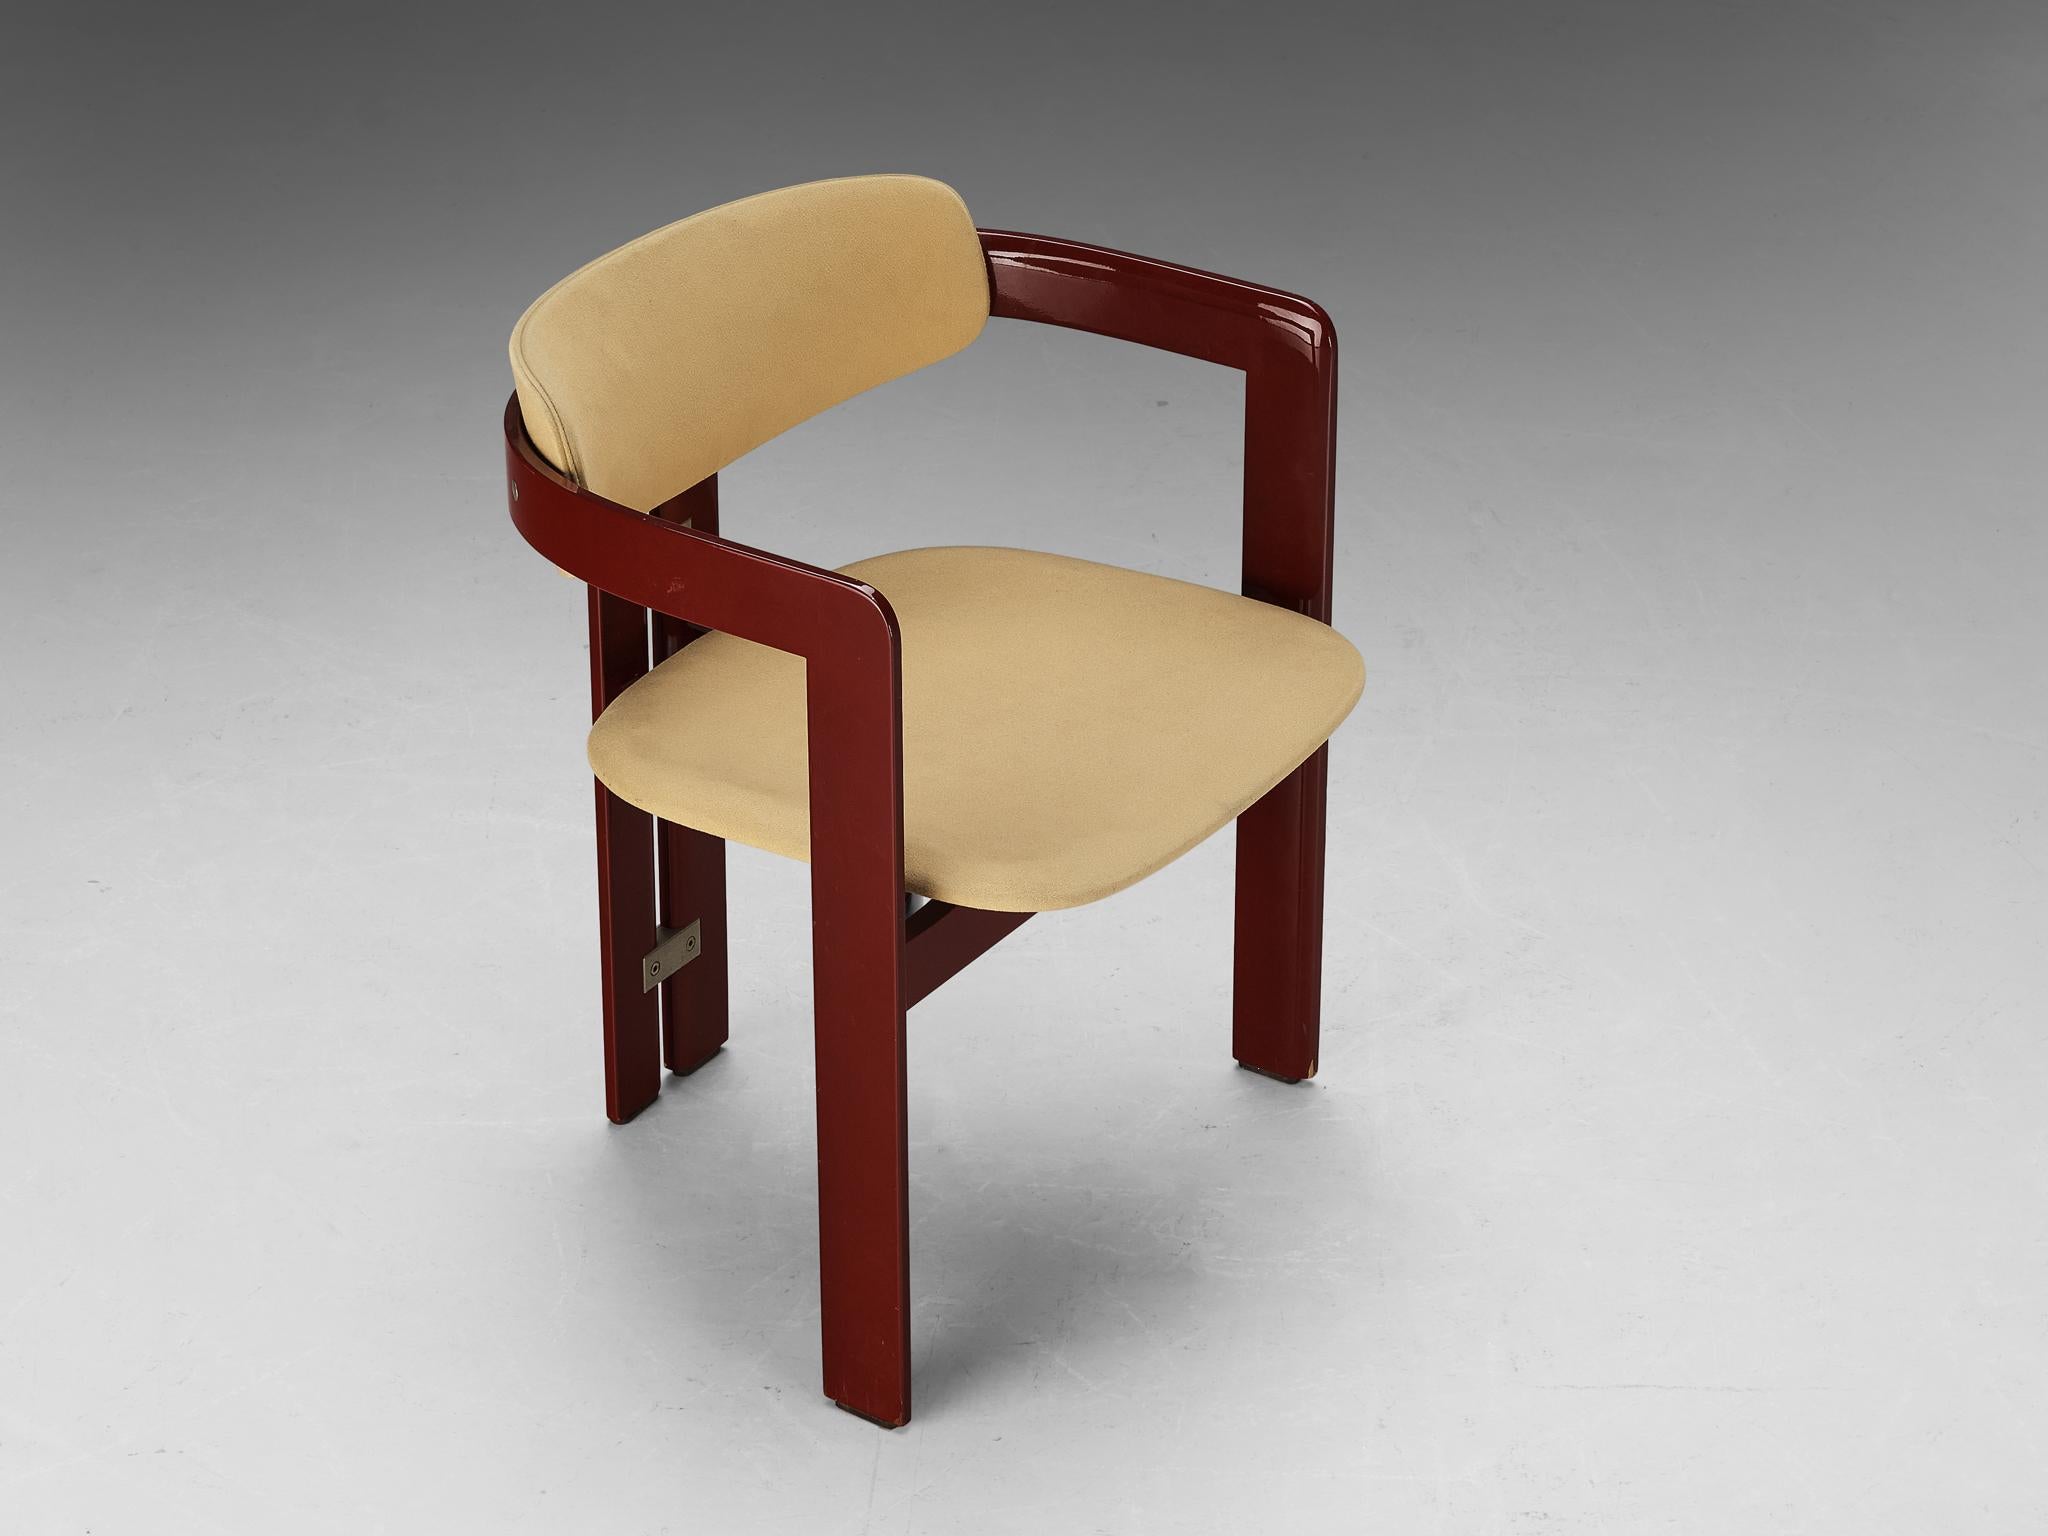 Augusto Savini for Pozzi, ‘Pamplona’ armchair, leather, ashwood, metal, Italy, 1960s.

Iconic 'Pamplona' armchair designed by Augusto Savini in high gloss red burgundy wood and beige suede. The chair shows a unique and characteristic design;